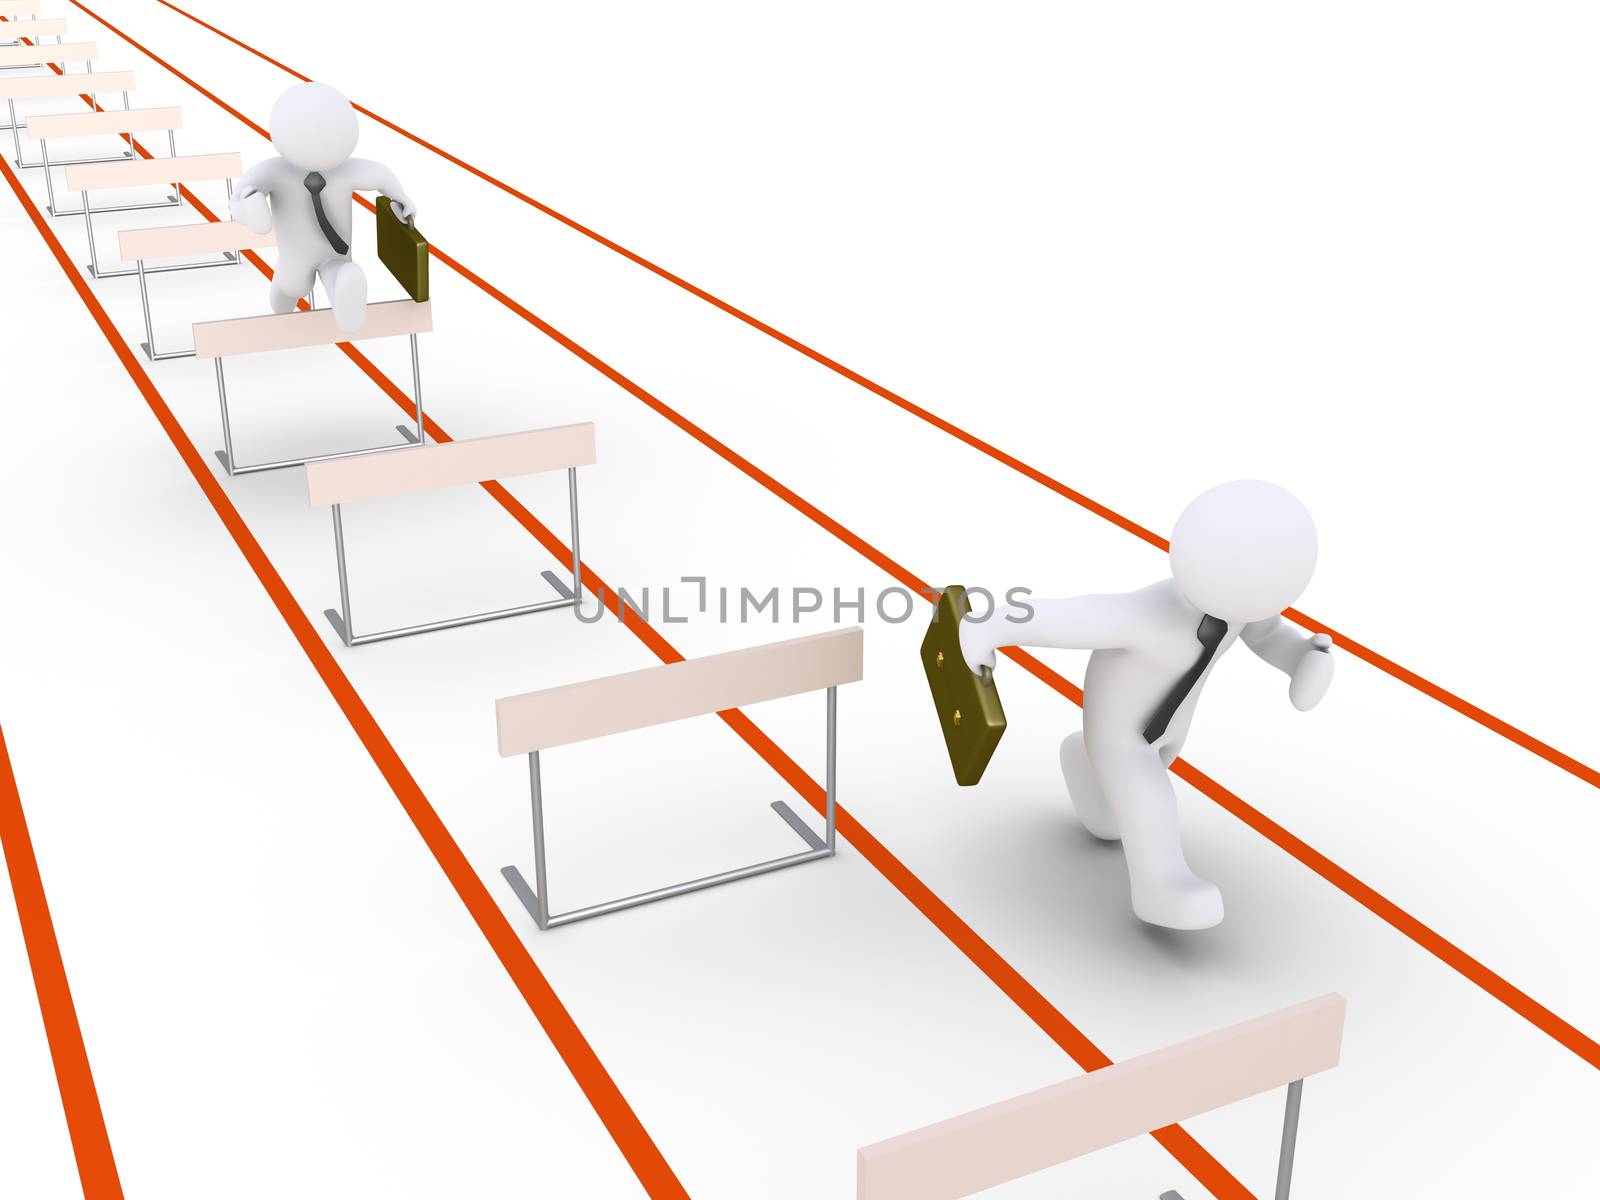 Businessman is hurdle racing and another is running without obstacles in his way